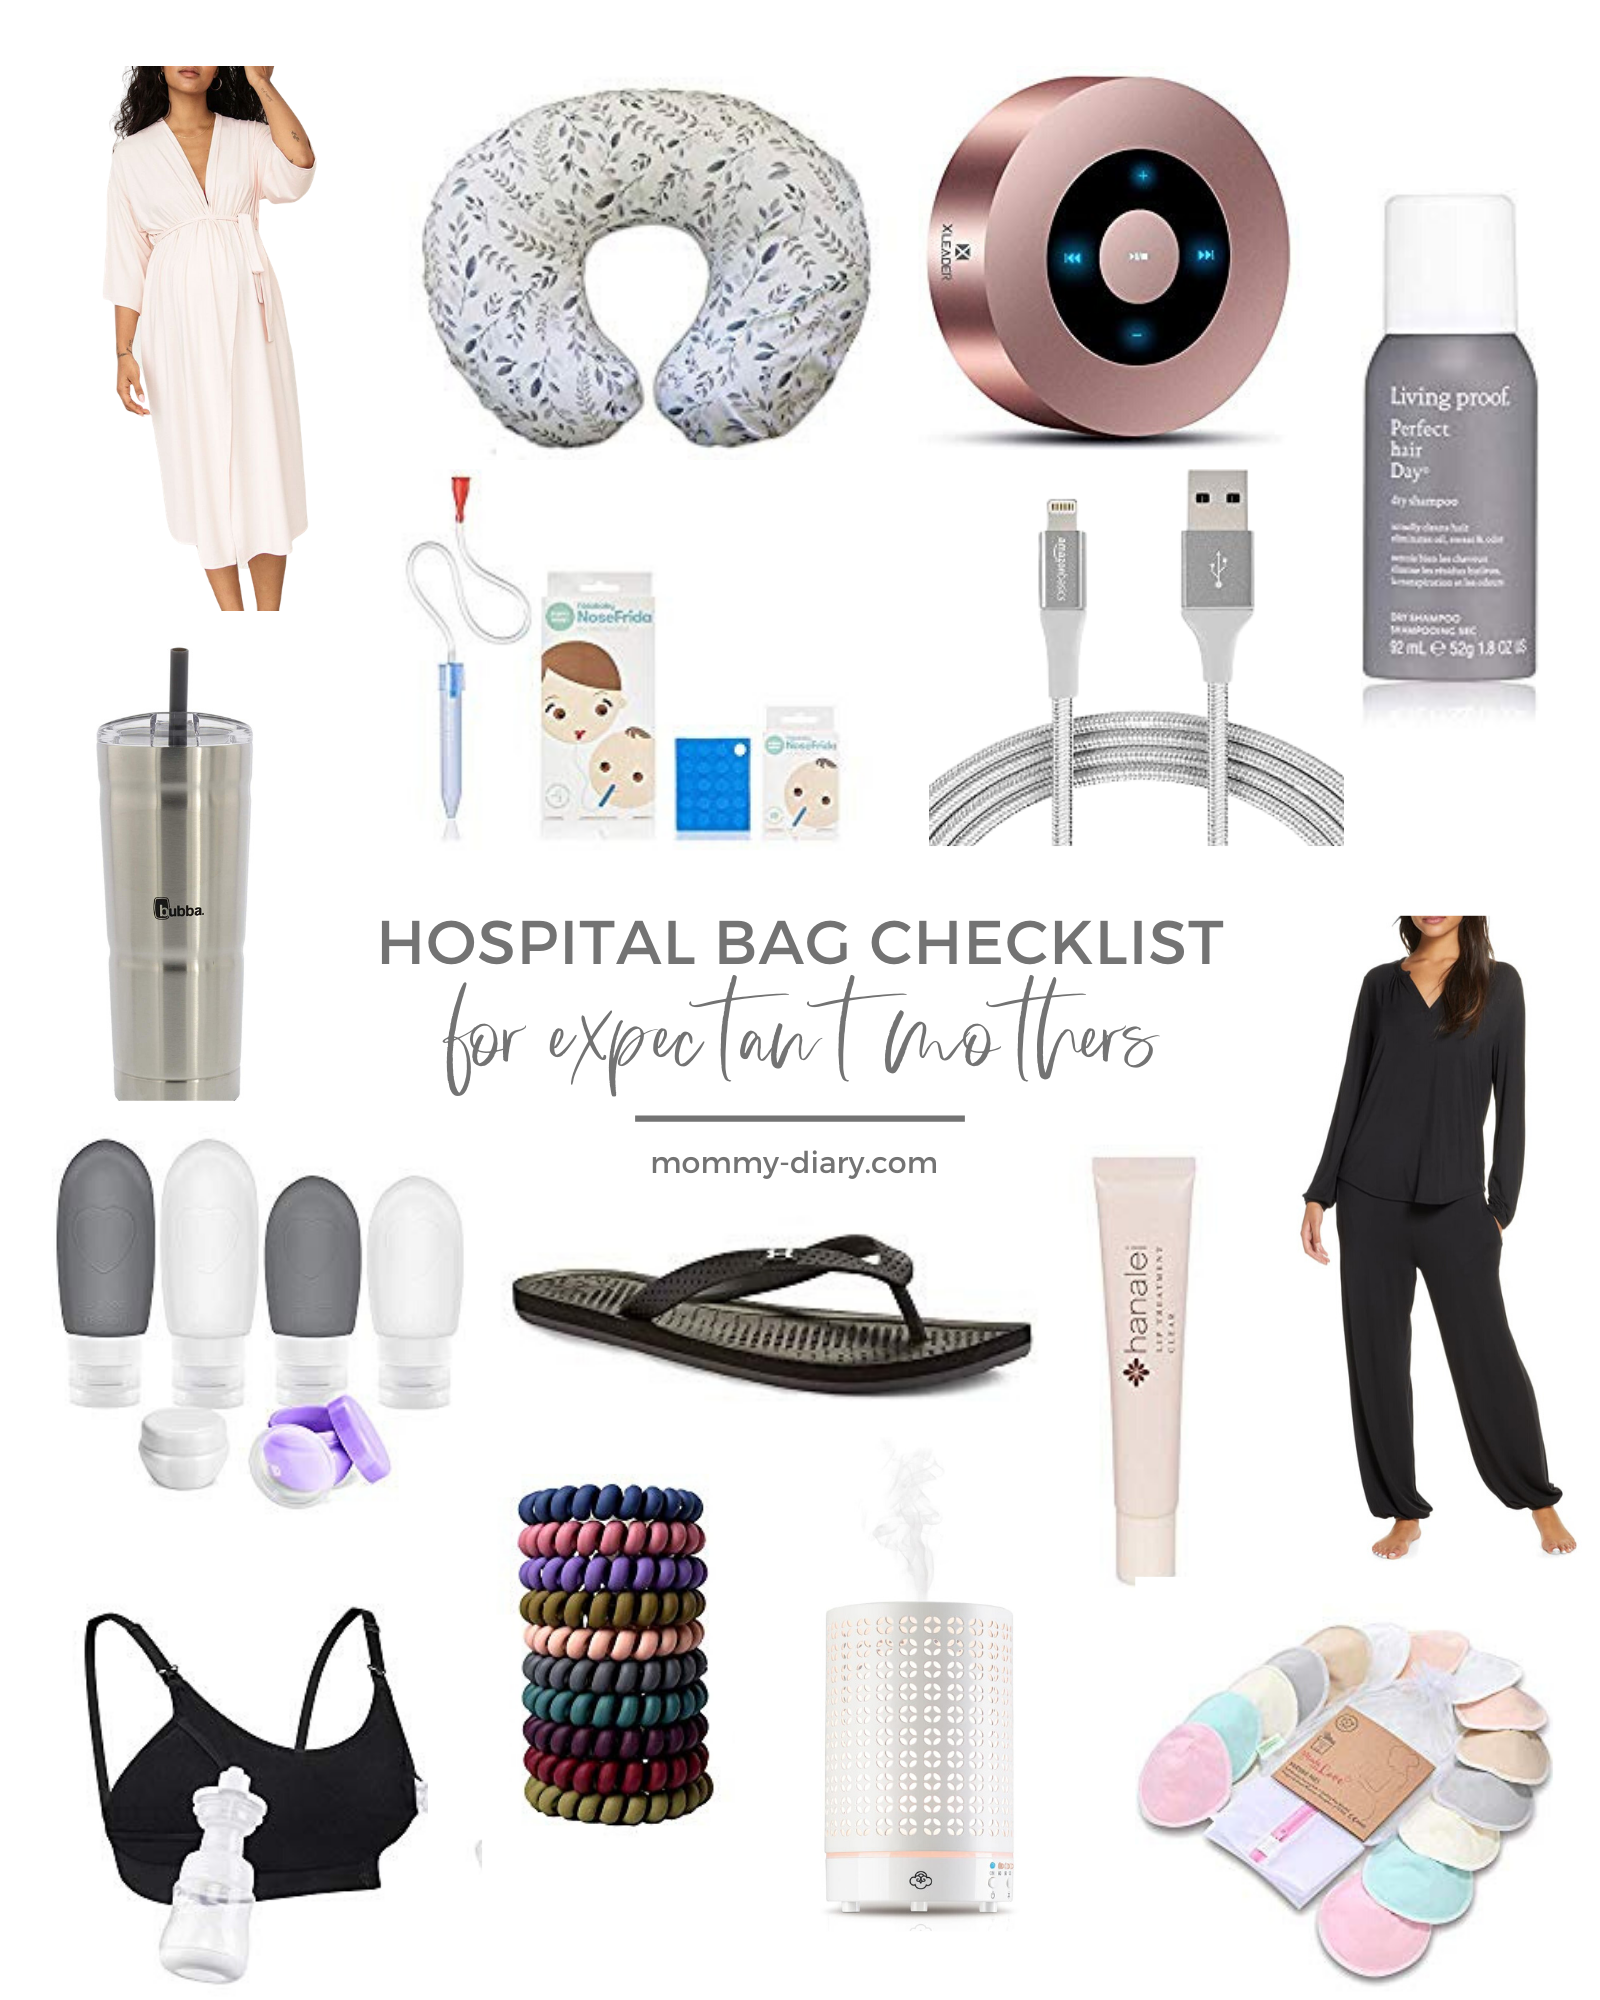 58 Things To Pack In Hospital Bag For A CSection